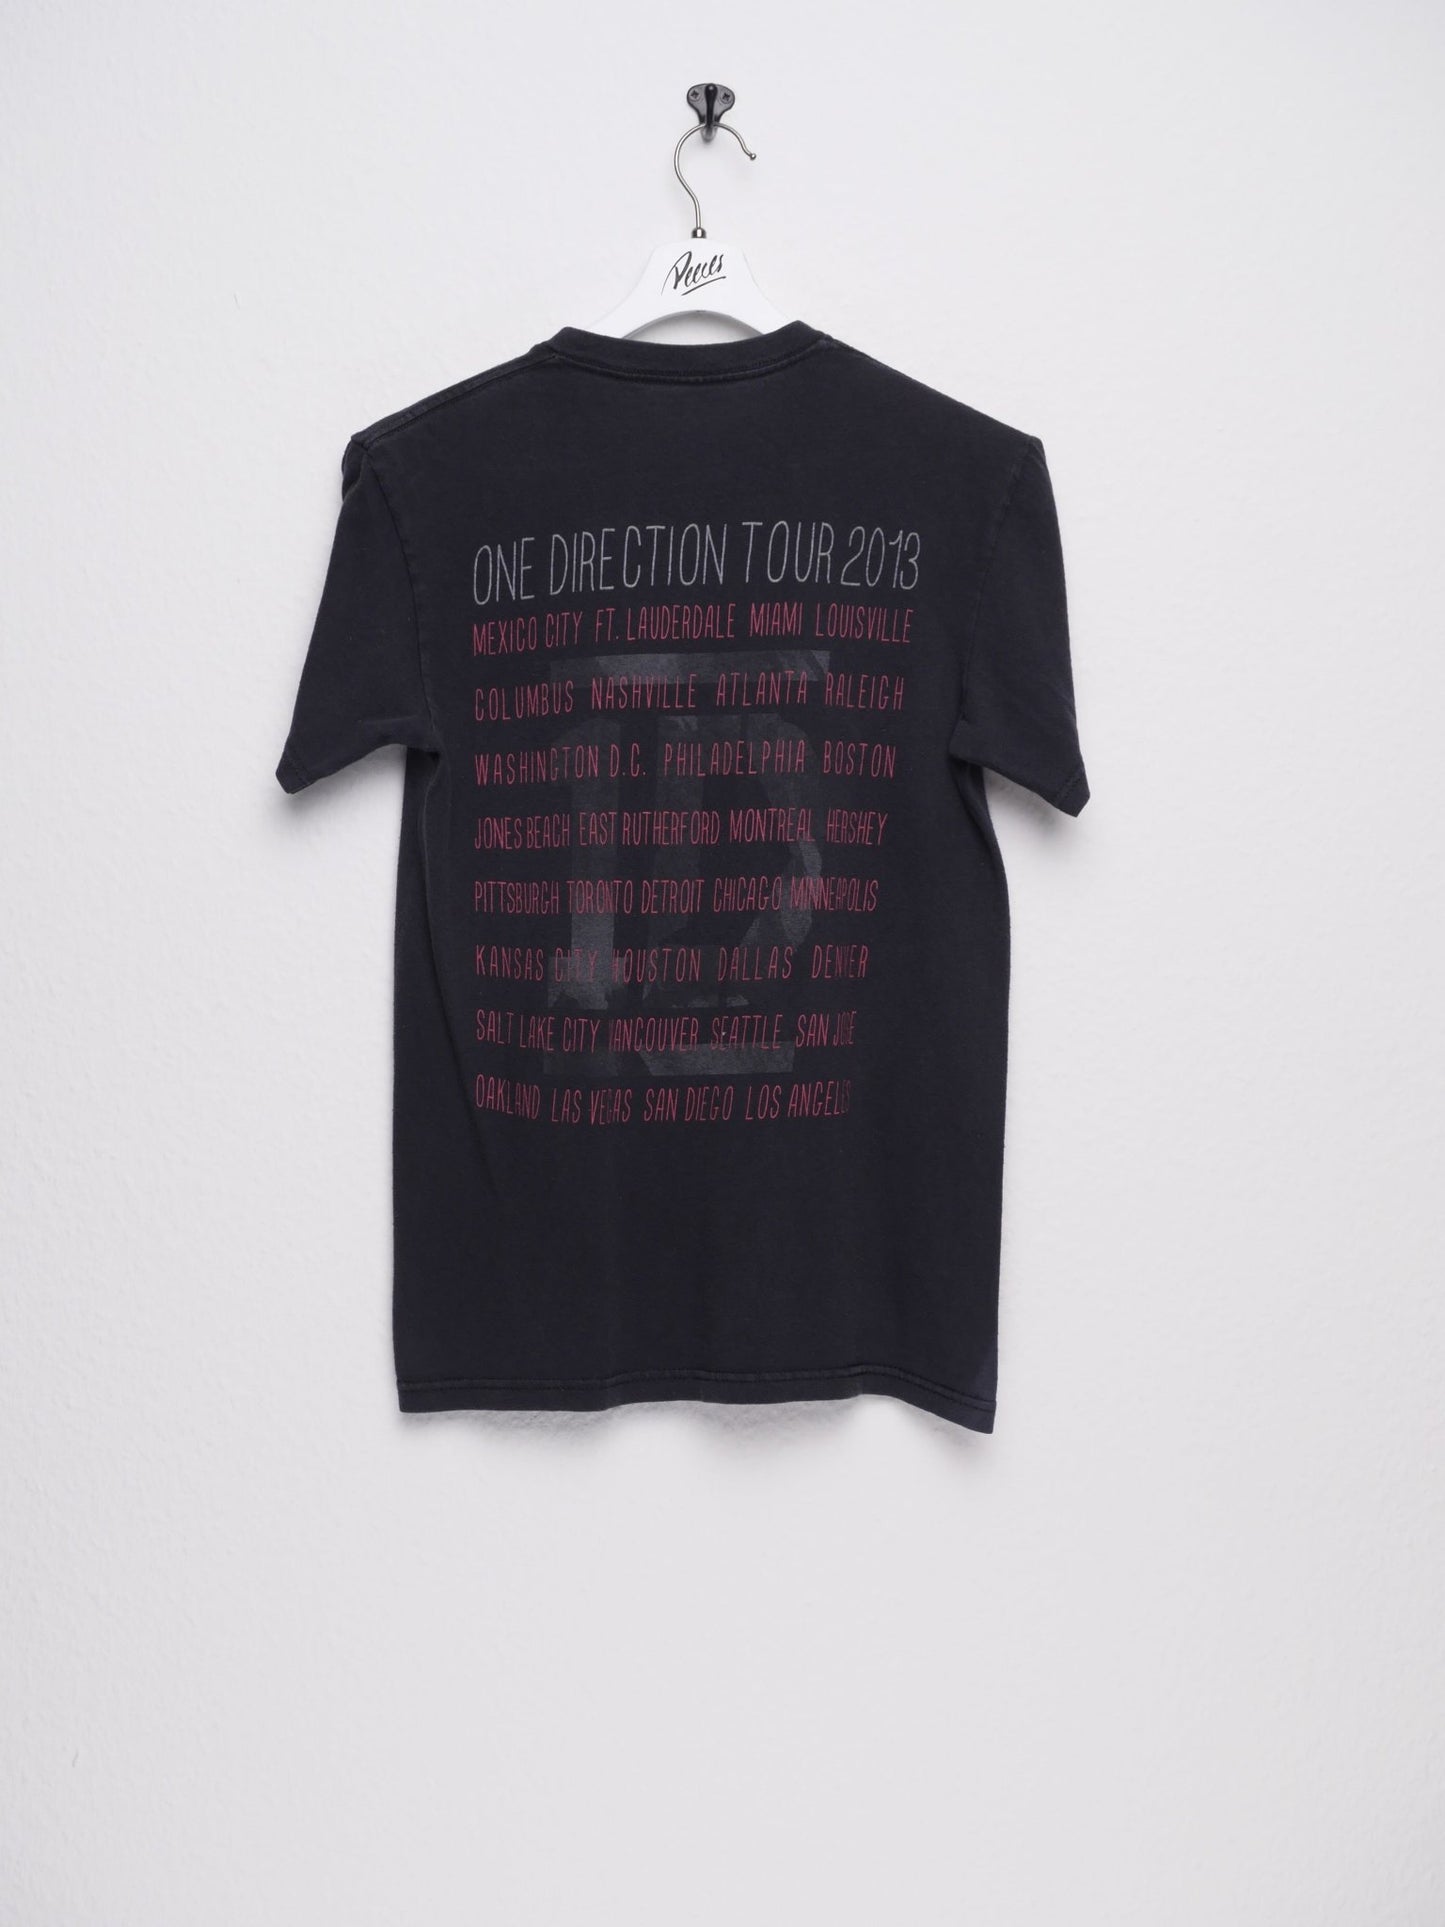 One Direction printed Graphic Vintage Shirt - Peeces